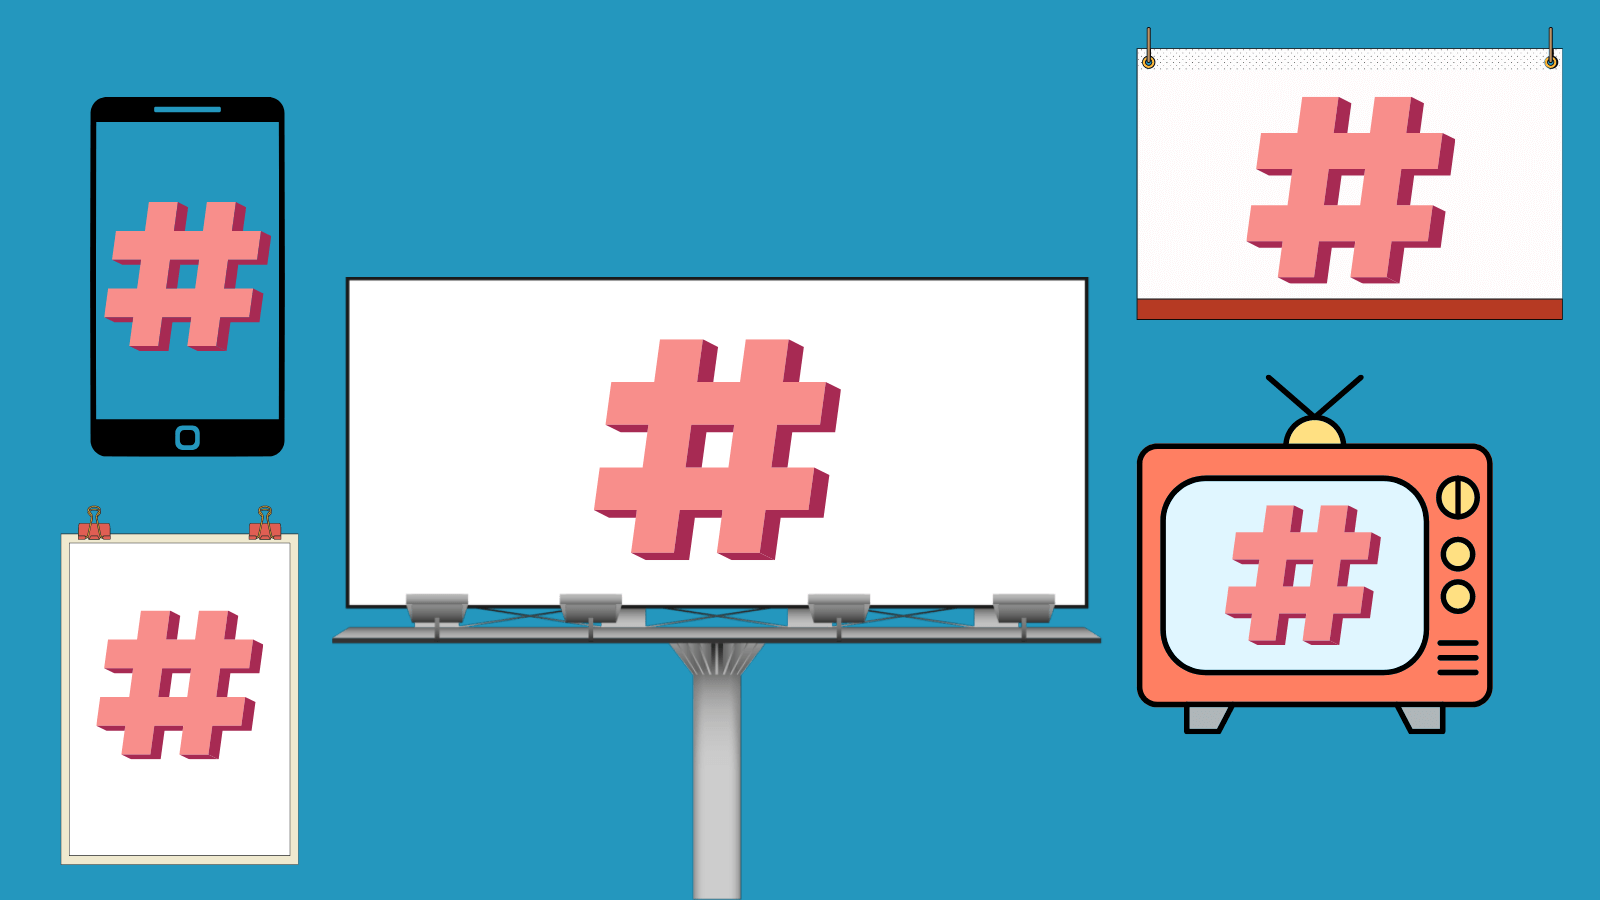 A smartphone, a poster, a billboard, a sign, and a TV all displaying the same 3D hashtag